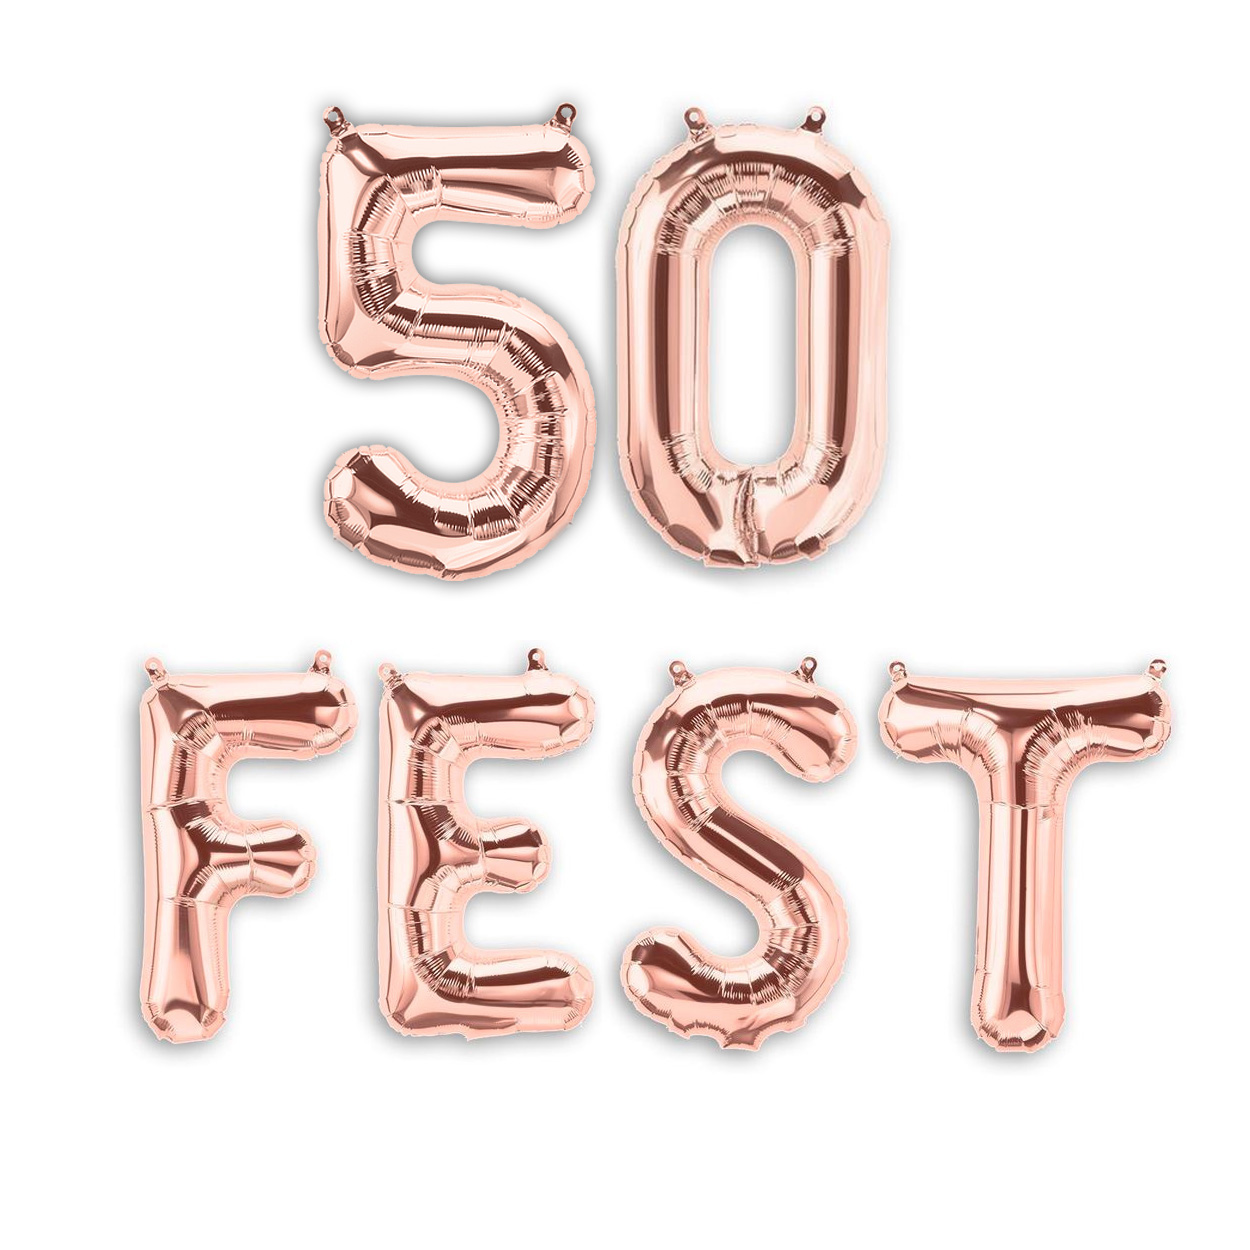 ROSE GOLD 50fest 50th birthday party foil balloons